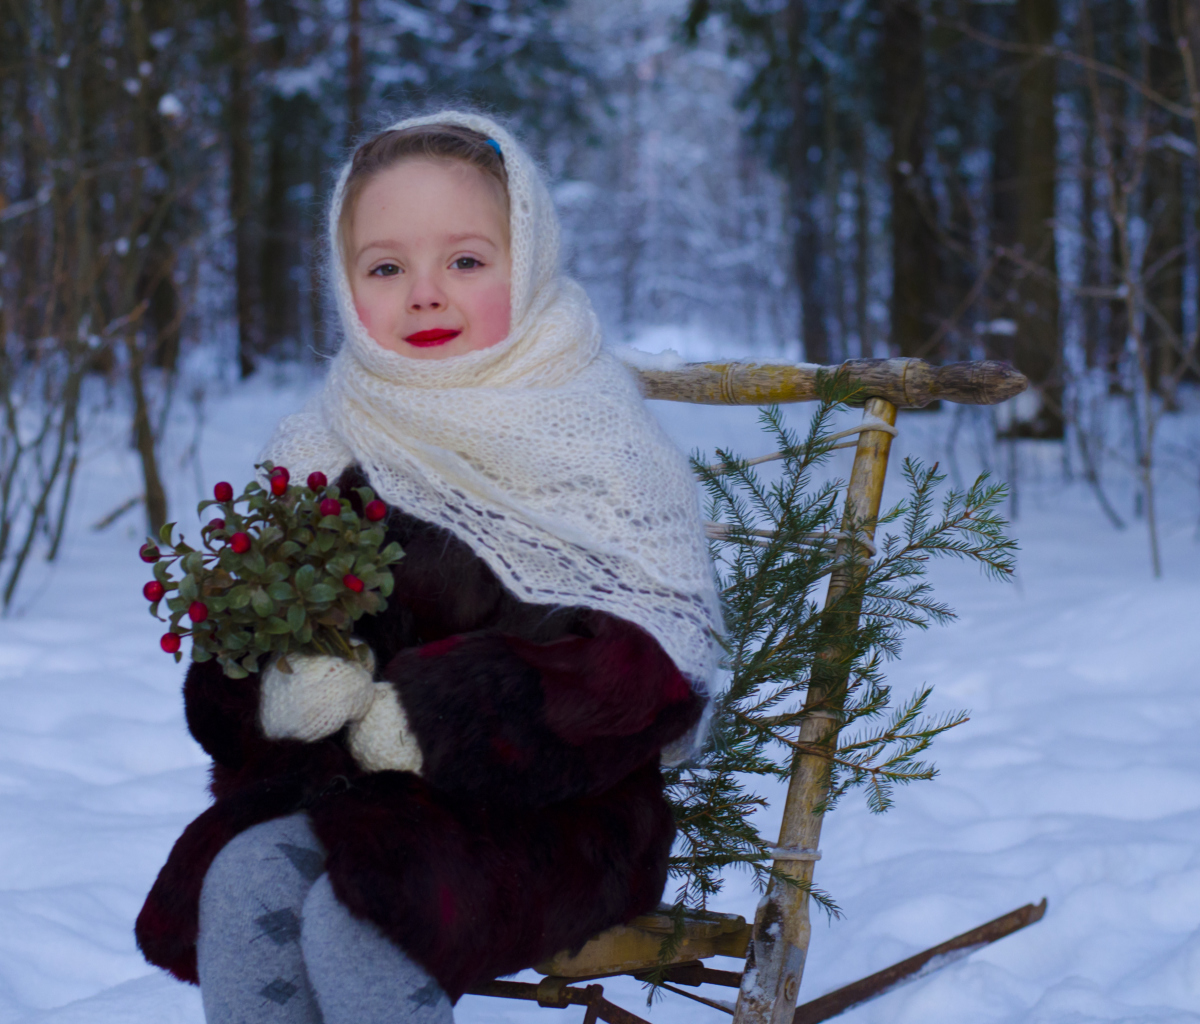 Little Girl In Winter Outfit wallpaper 1200x1024